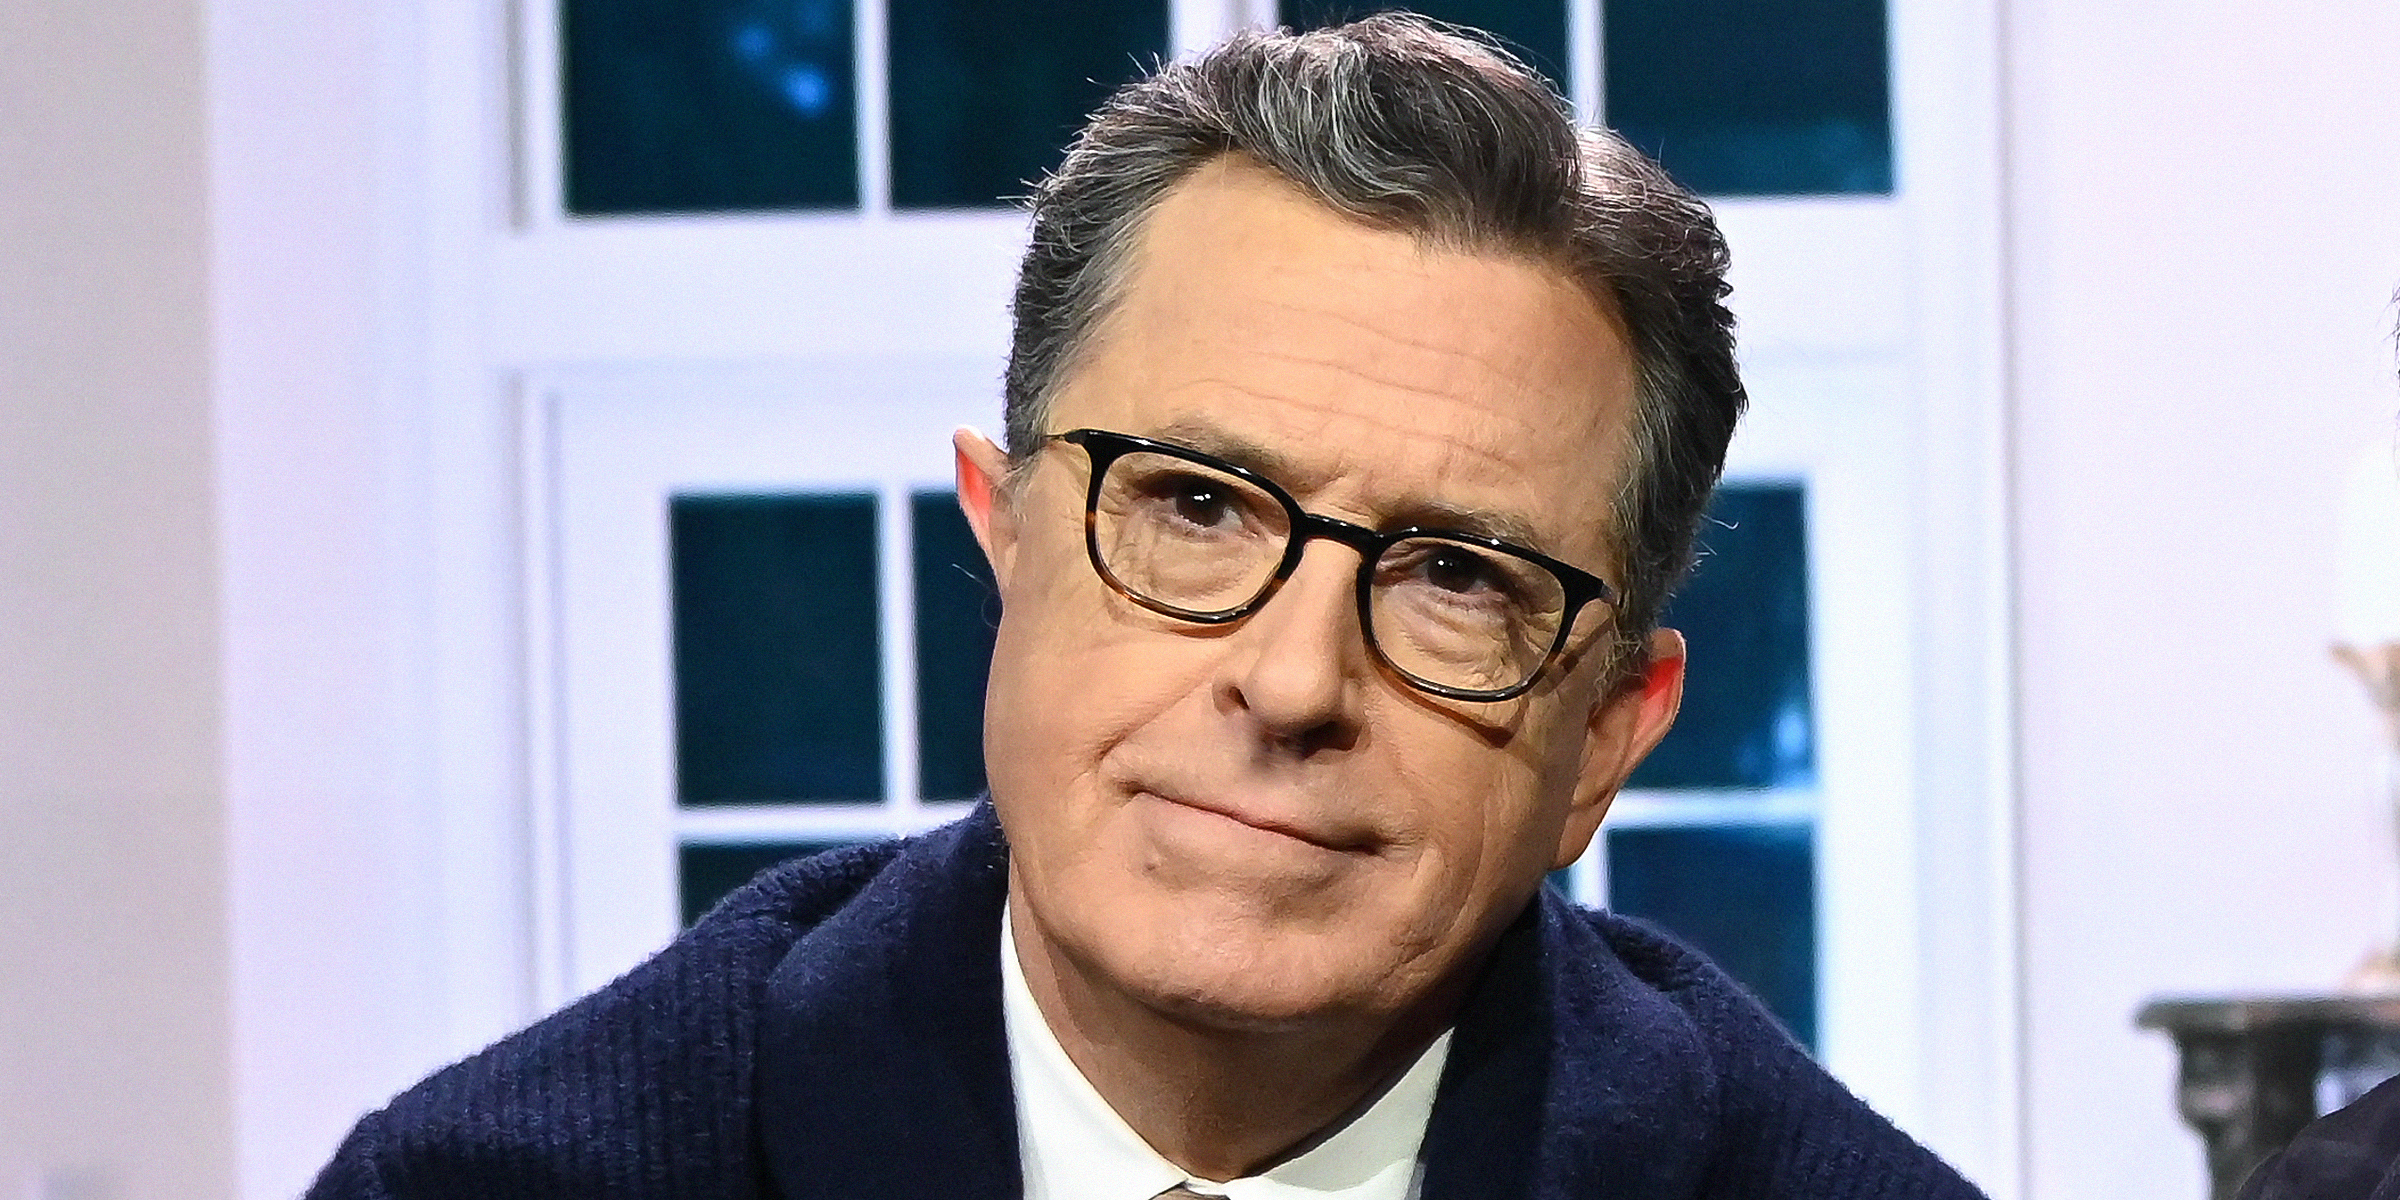 Stephen Colbert | Source: Getty Images